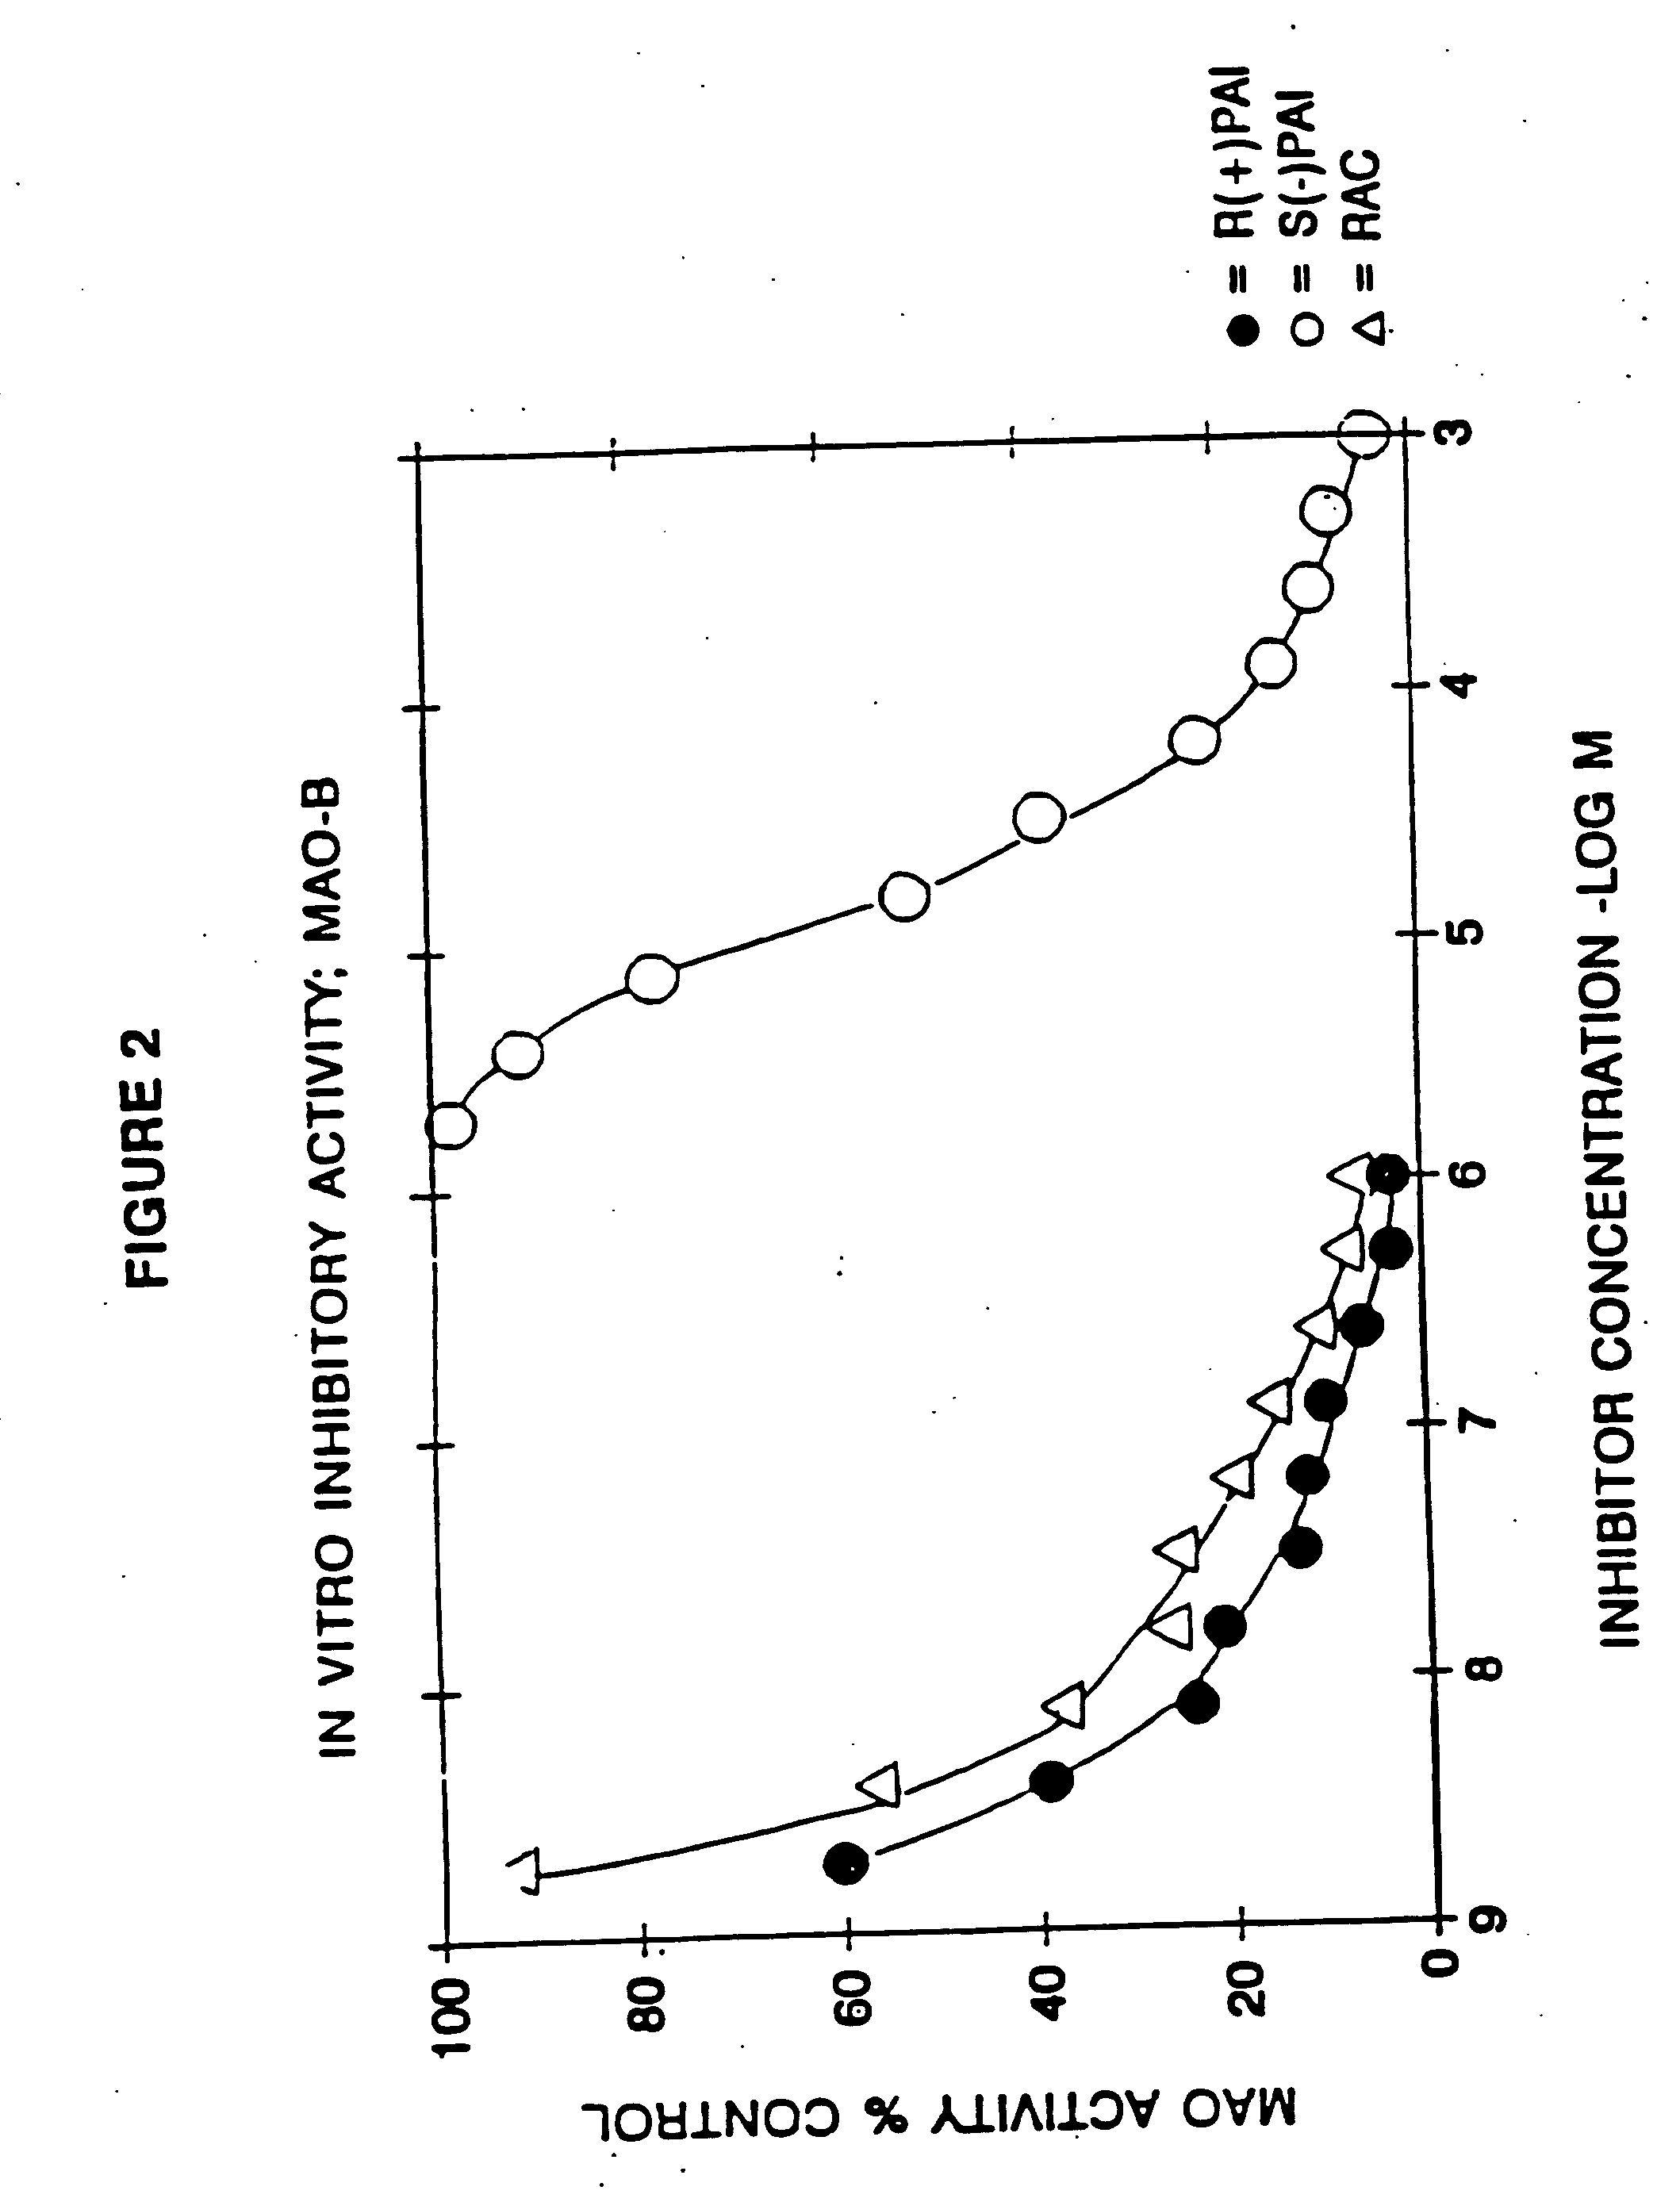 Use of R-enantiomer of N-propargyl-1-aminoindan, salts, compositions and uses thereof